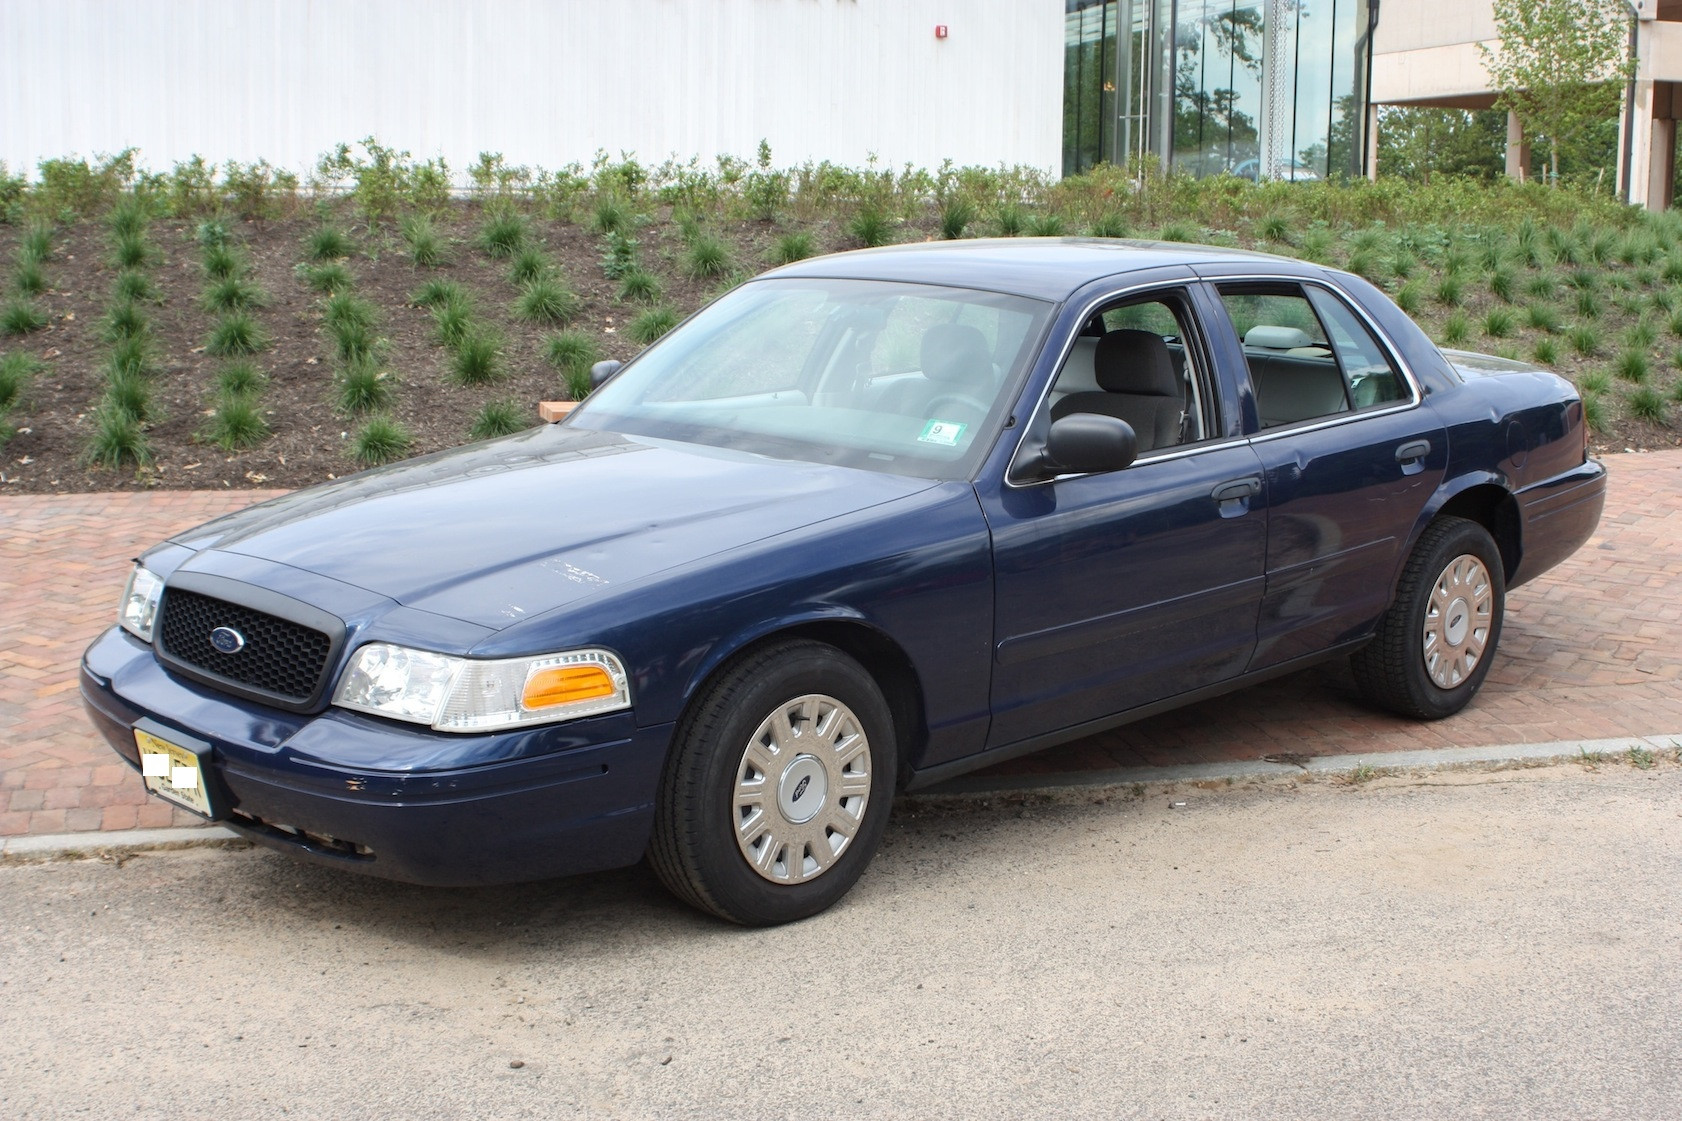 Sleeper Crown Vic Sure To Give Other Motorists Nightmares